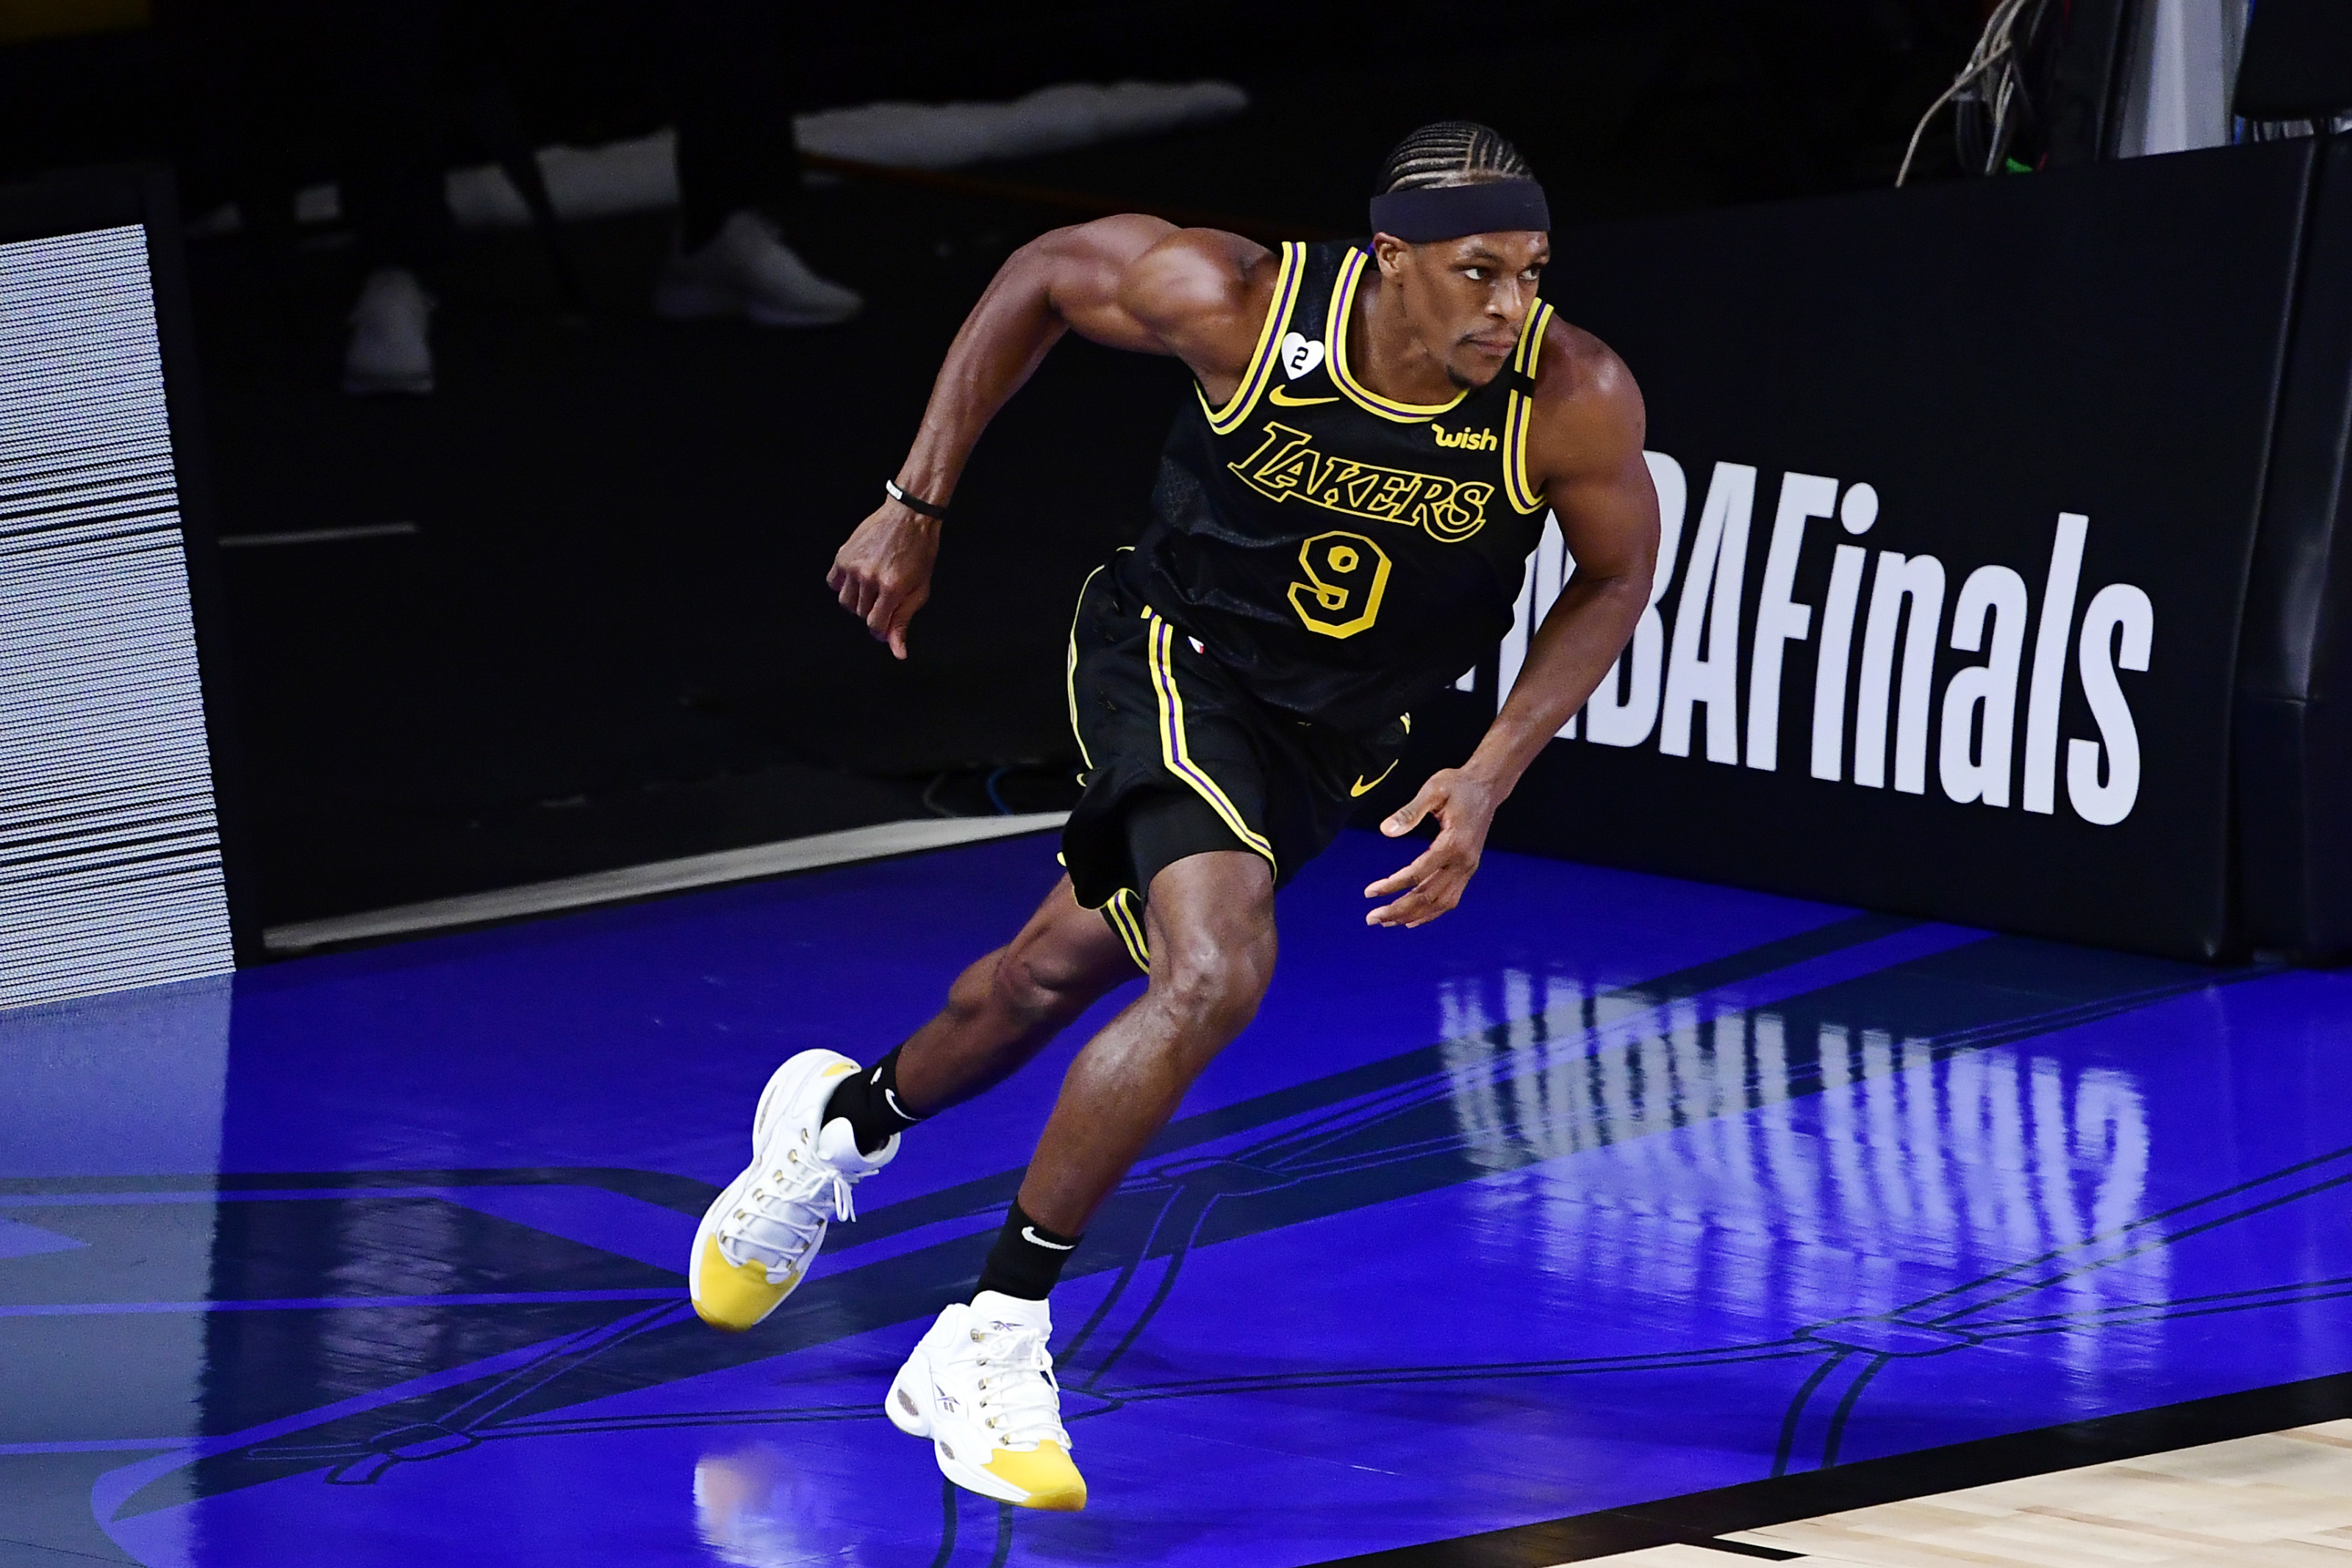 NBA Finals 2020: Los Angeles Lakers guard Rajon Rondo has the opportunity  to make unique history